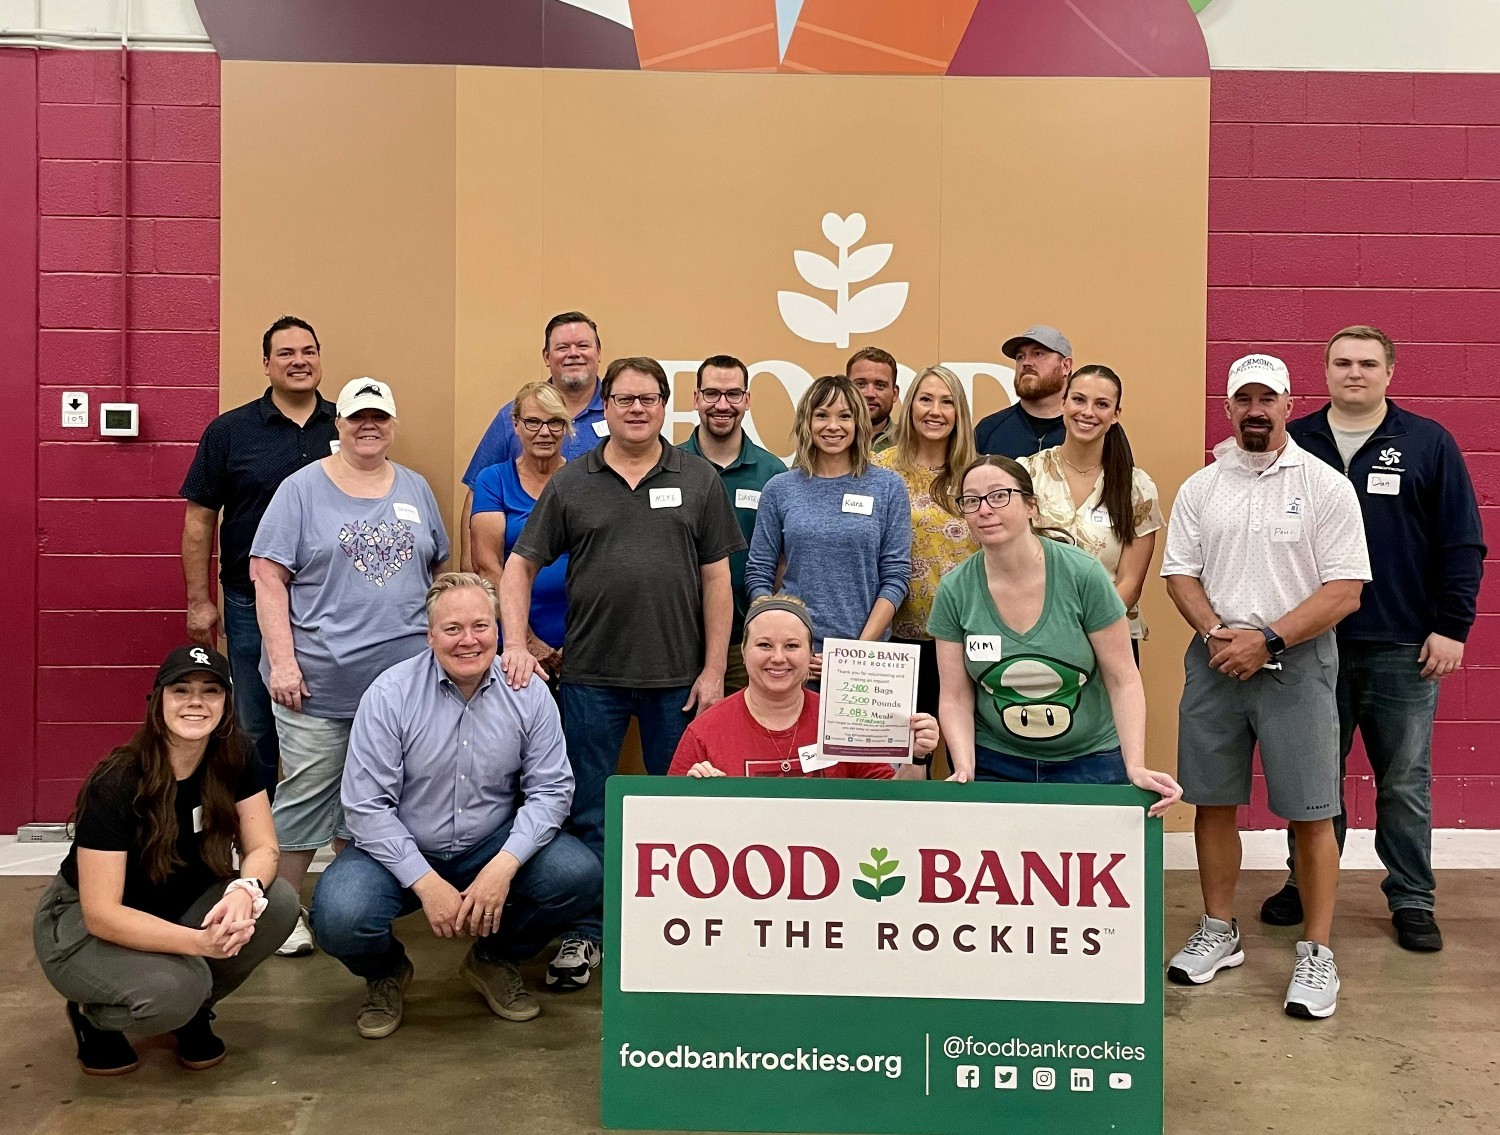 Volunteering at The Food Bank of the Rockies during our 2023 Internal LIFT (Learn. Inspire. Focus. Thrive) Conference.